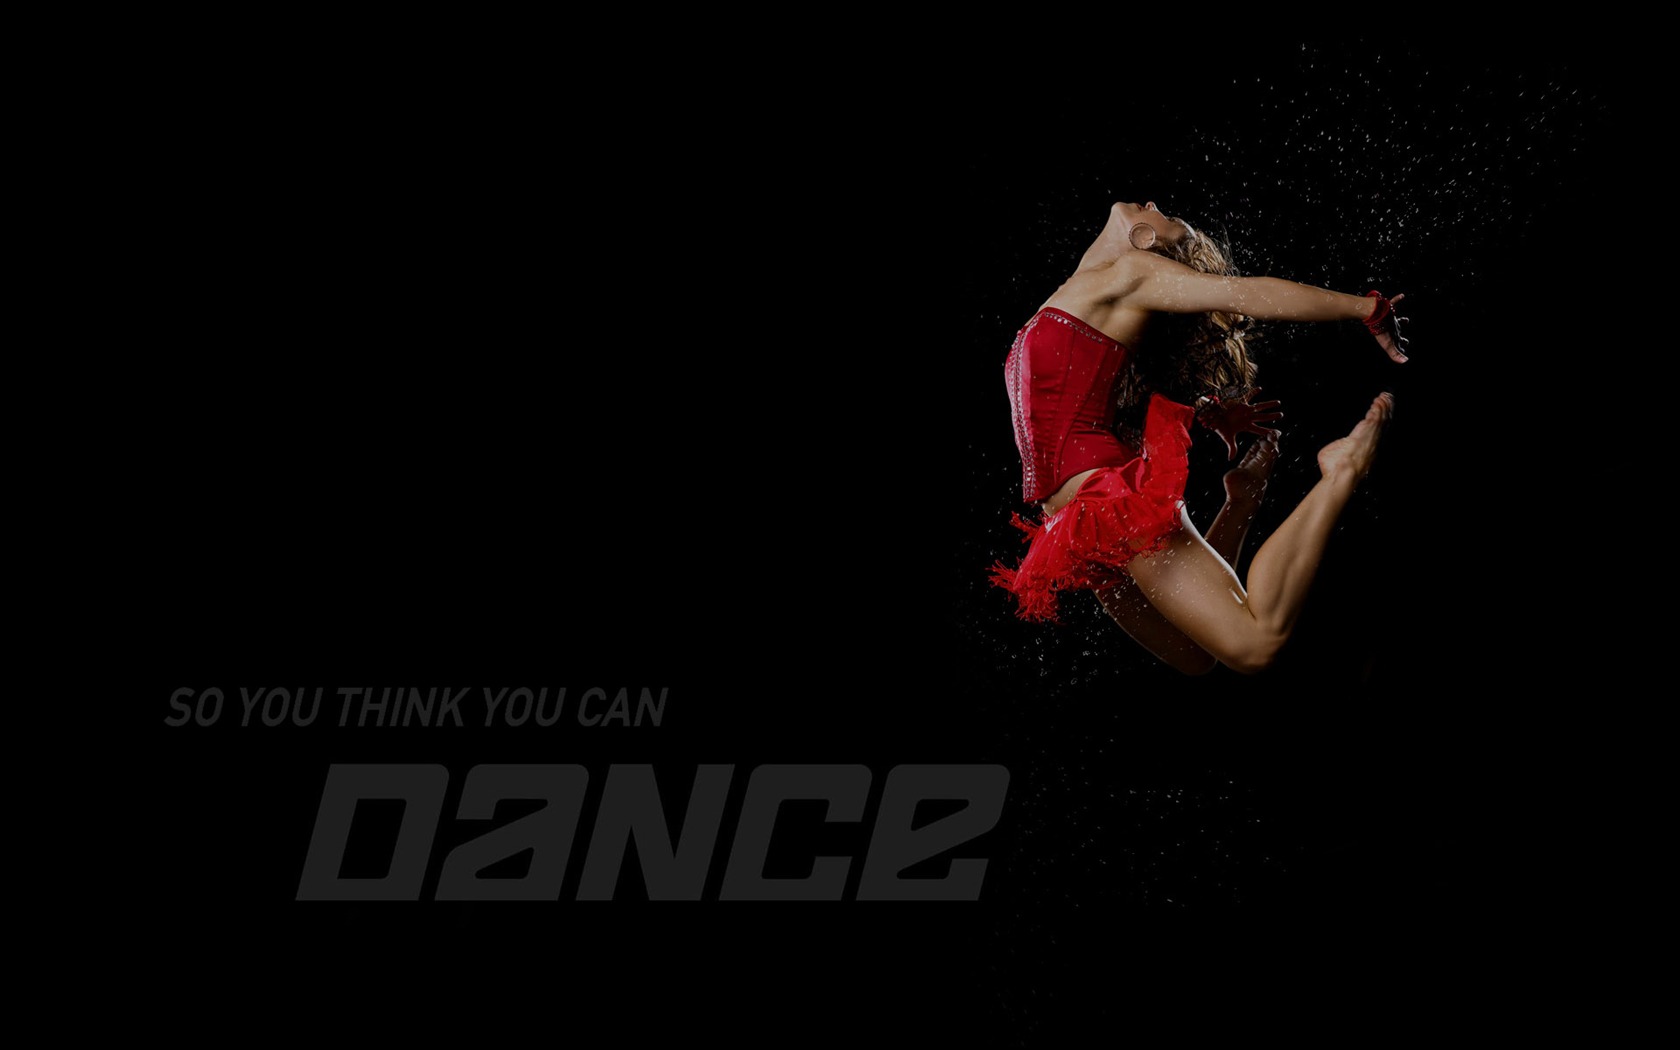 So You Think You Can Dance wallpaper (2) #1 - 1680x1050